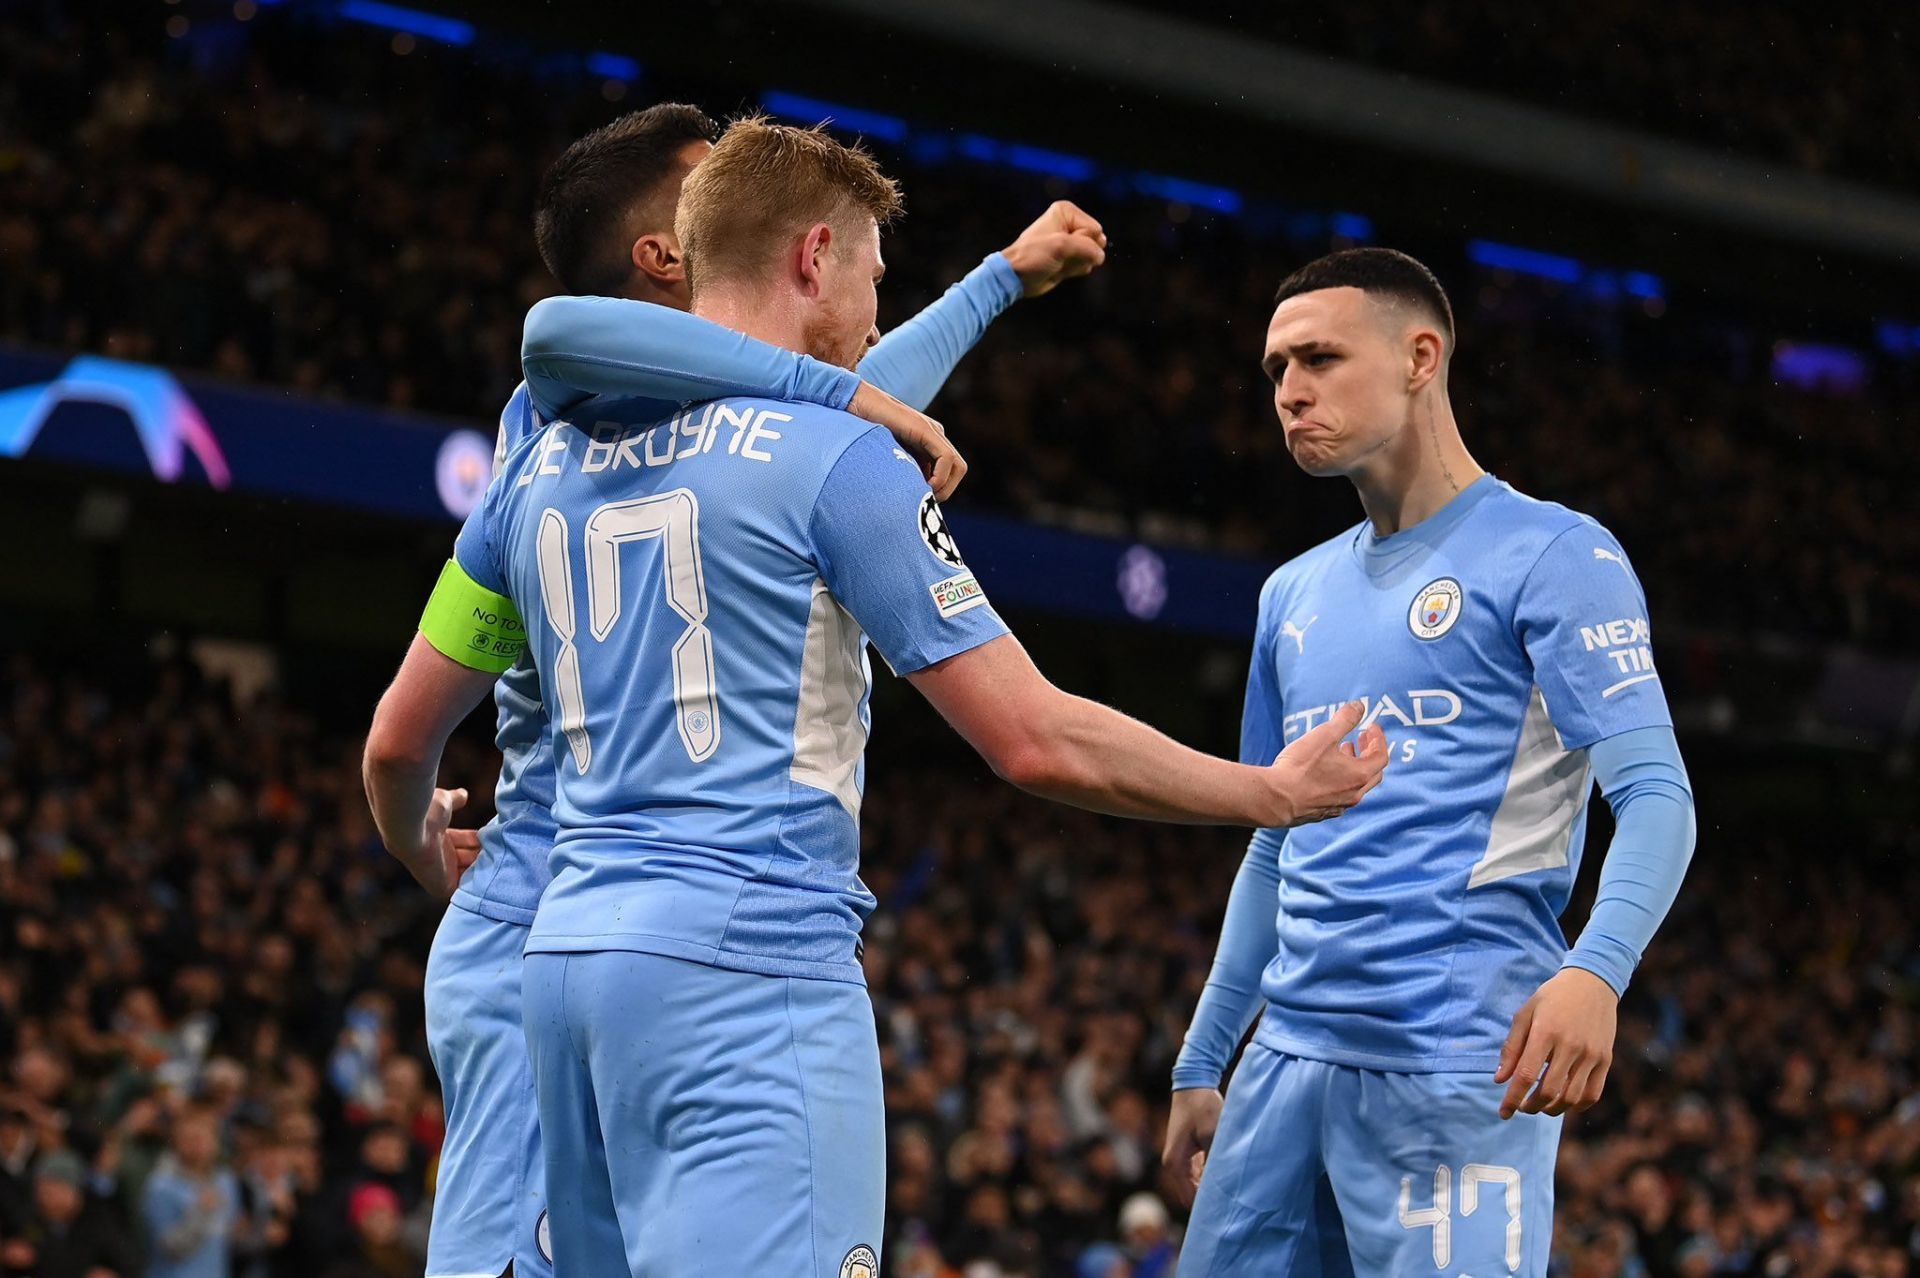 Phil Foden came on to impact the game as Manchester City beat Atletico Madrid